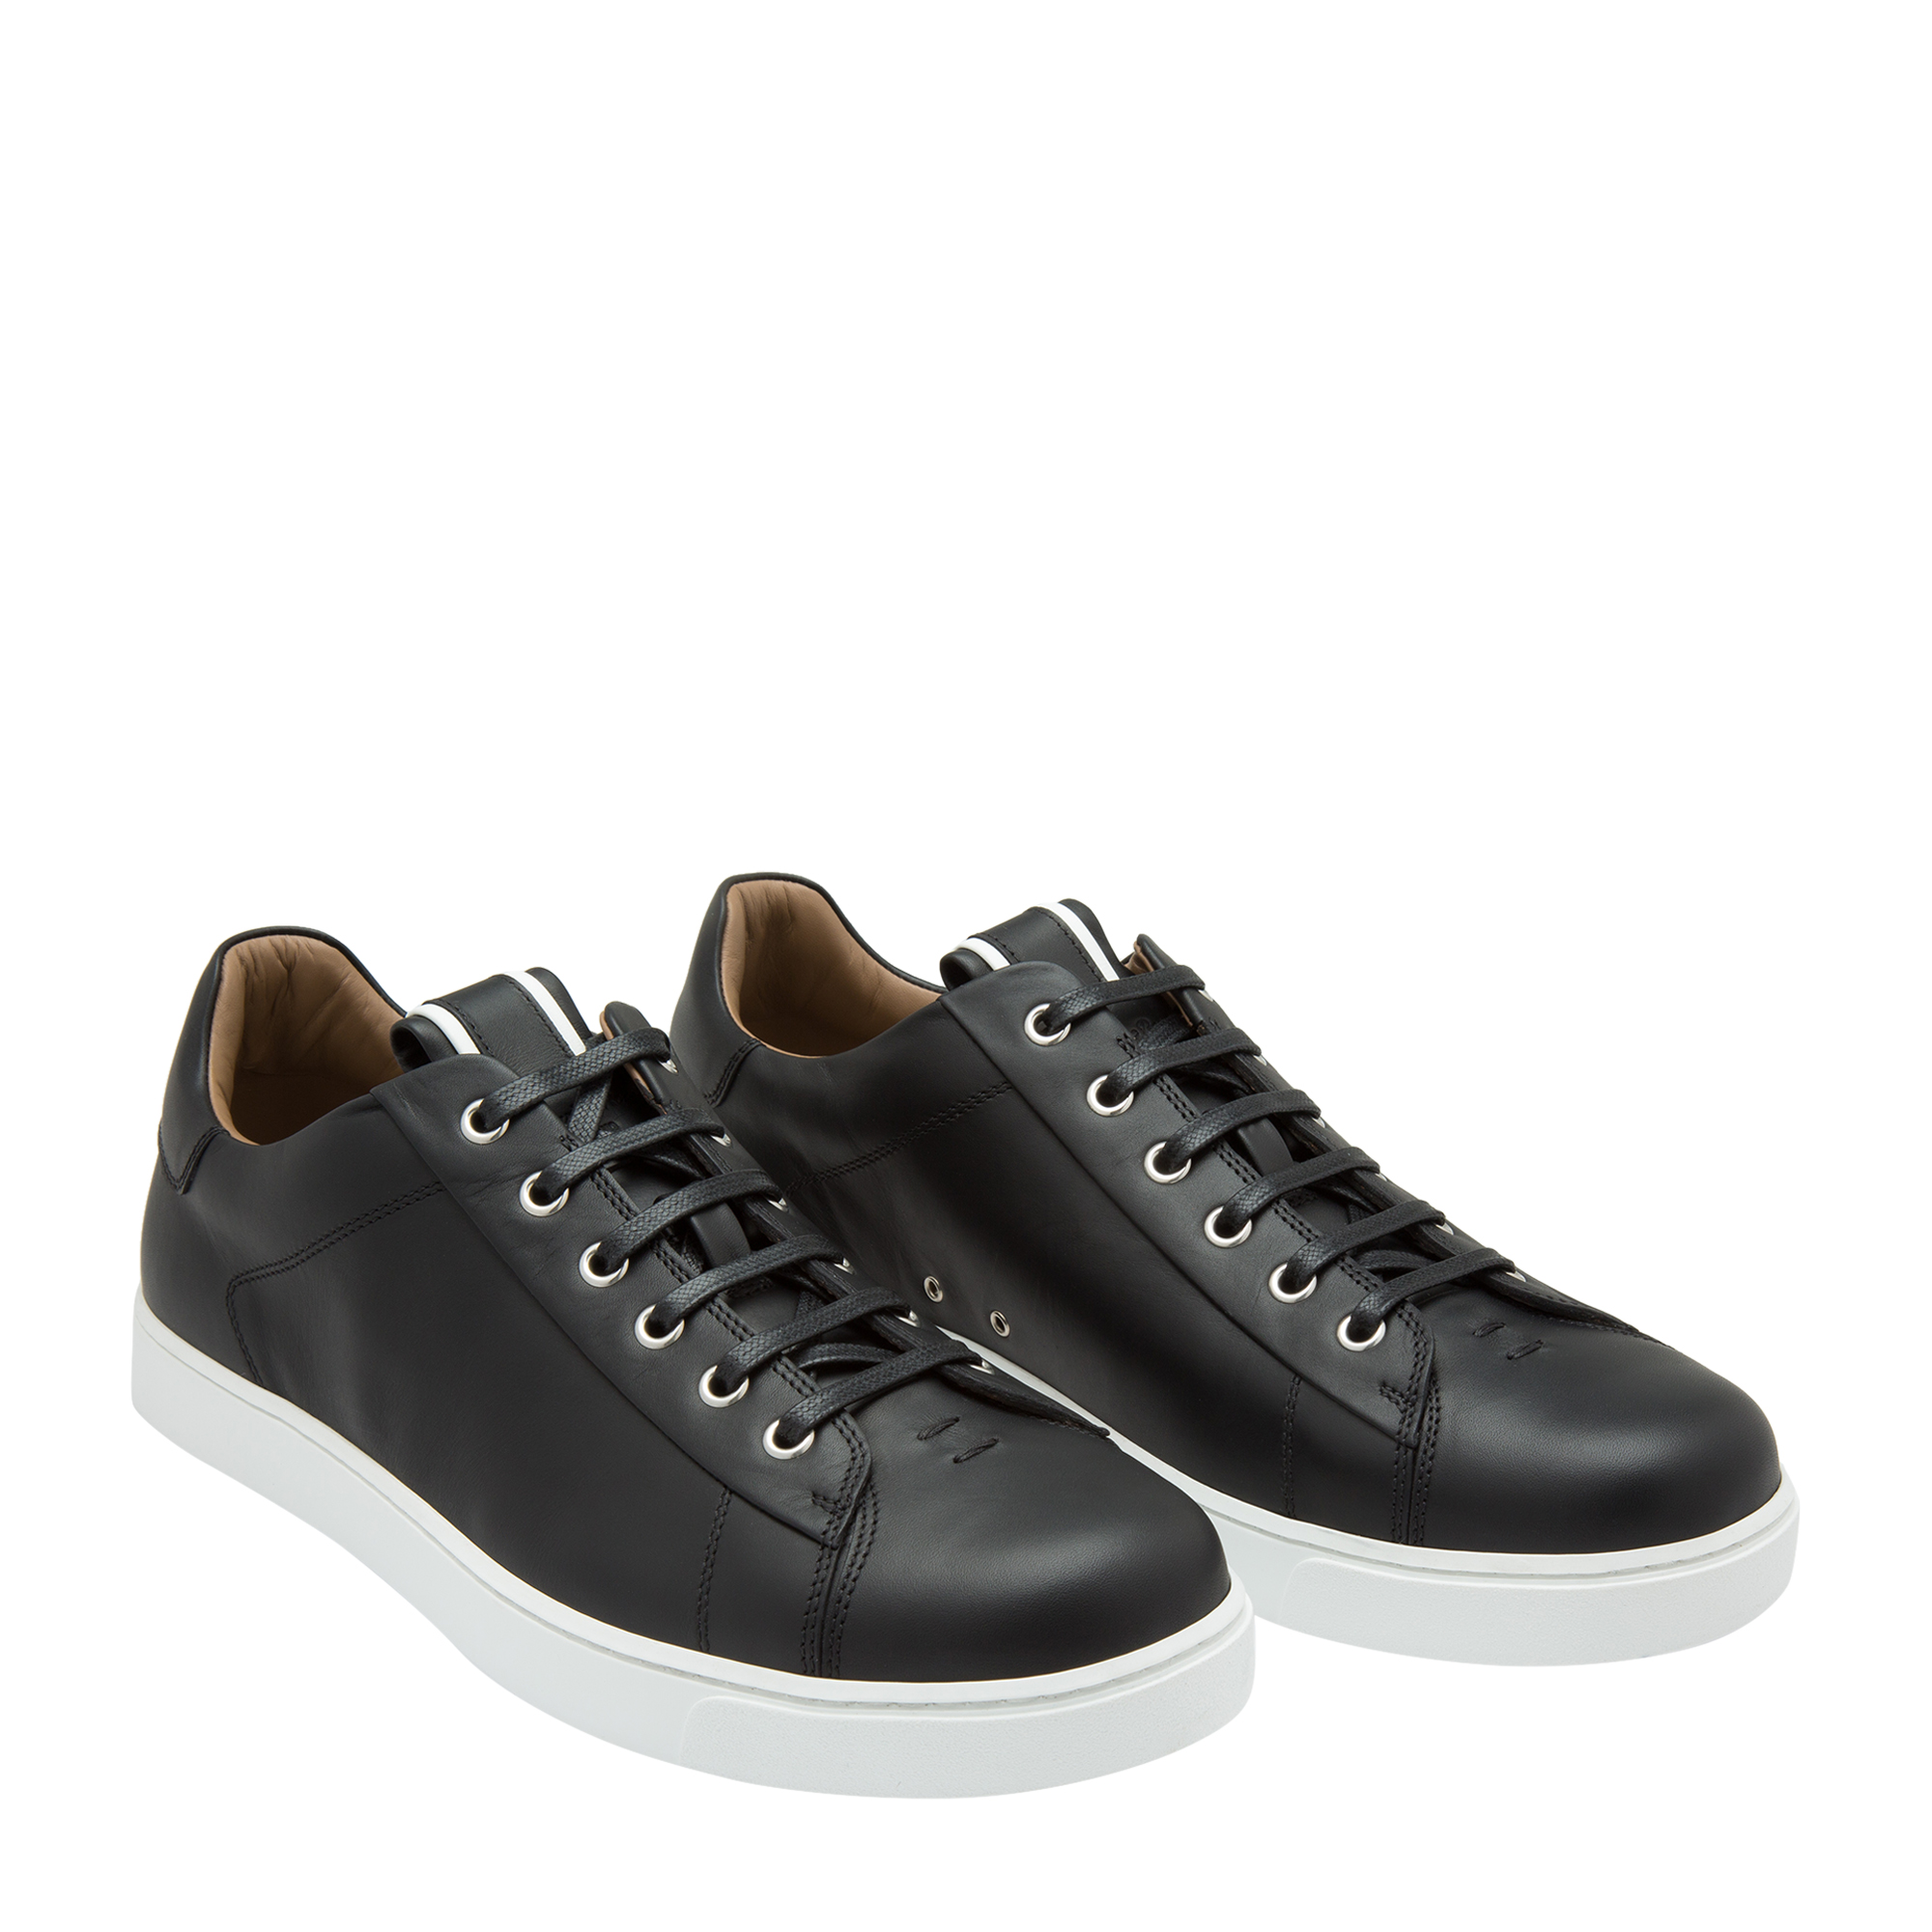 Low-top leather sneakers, Black